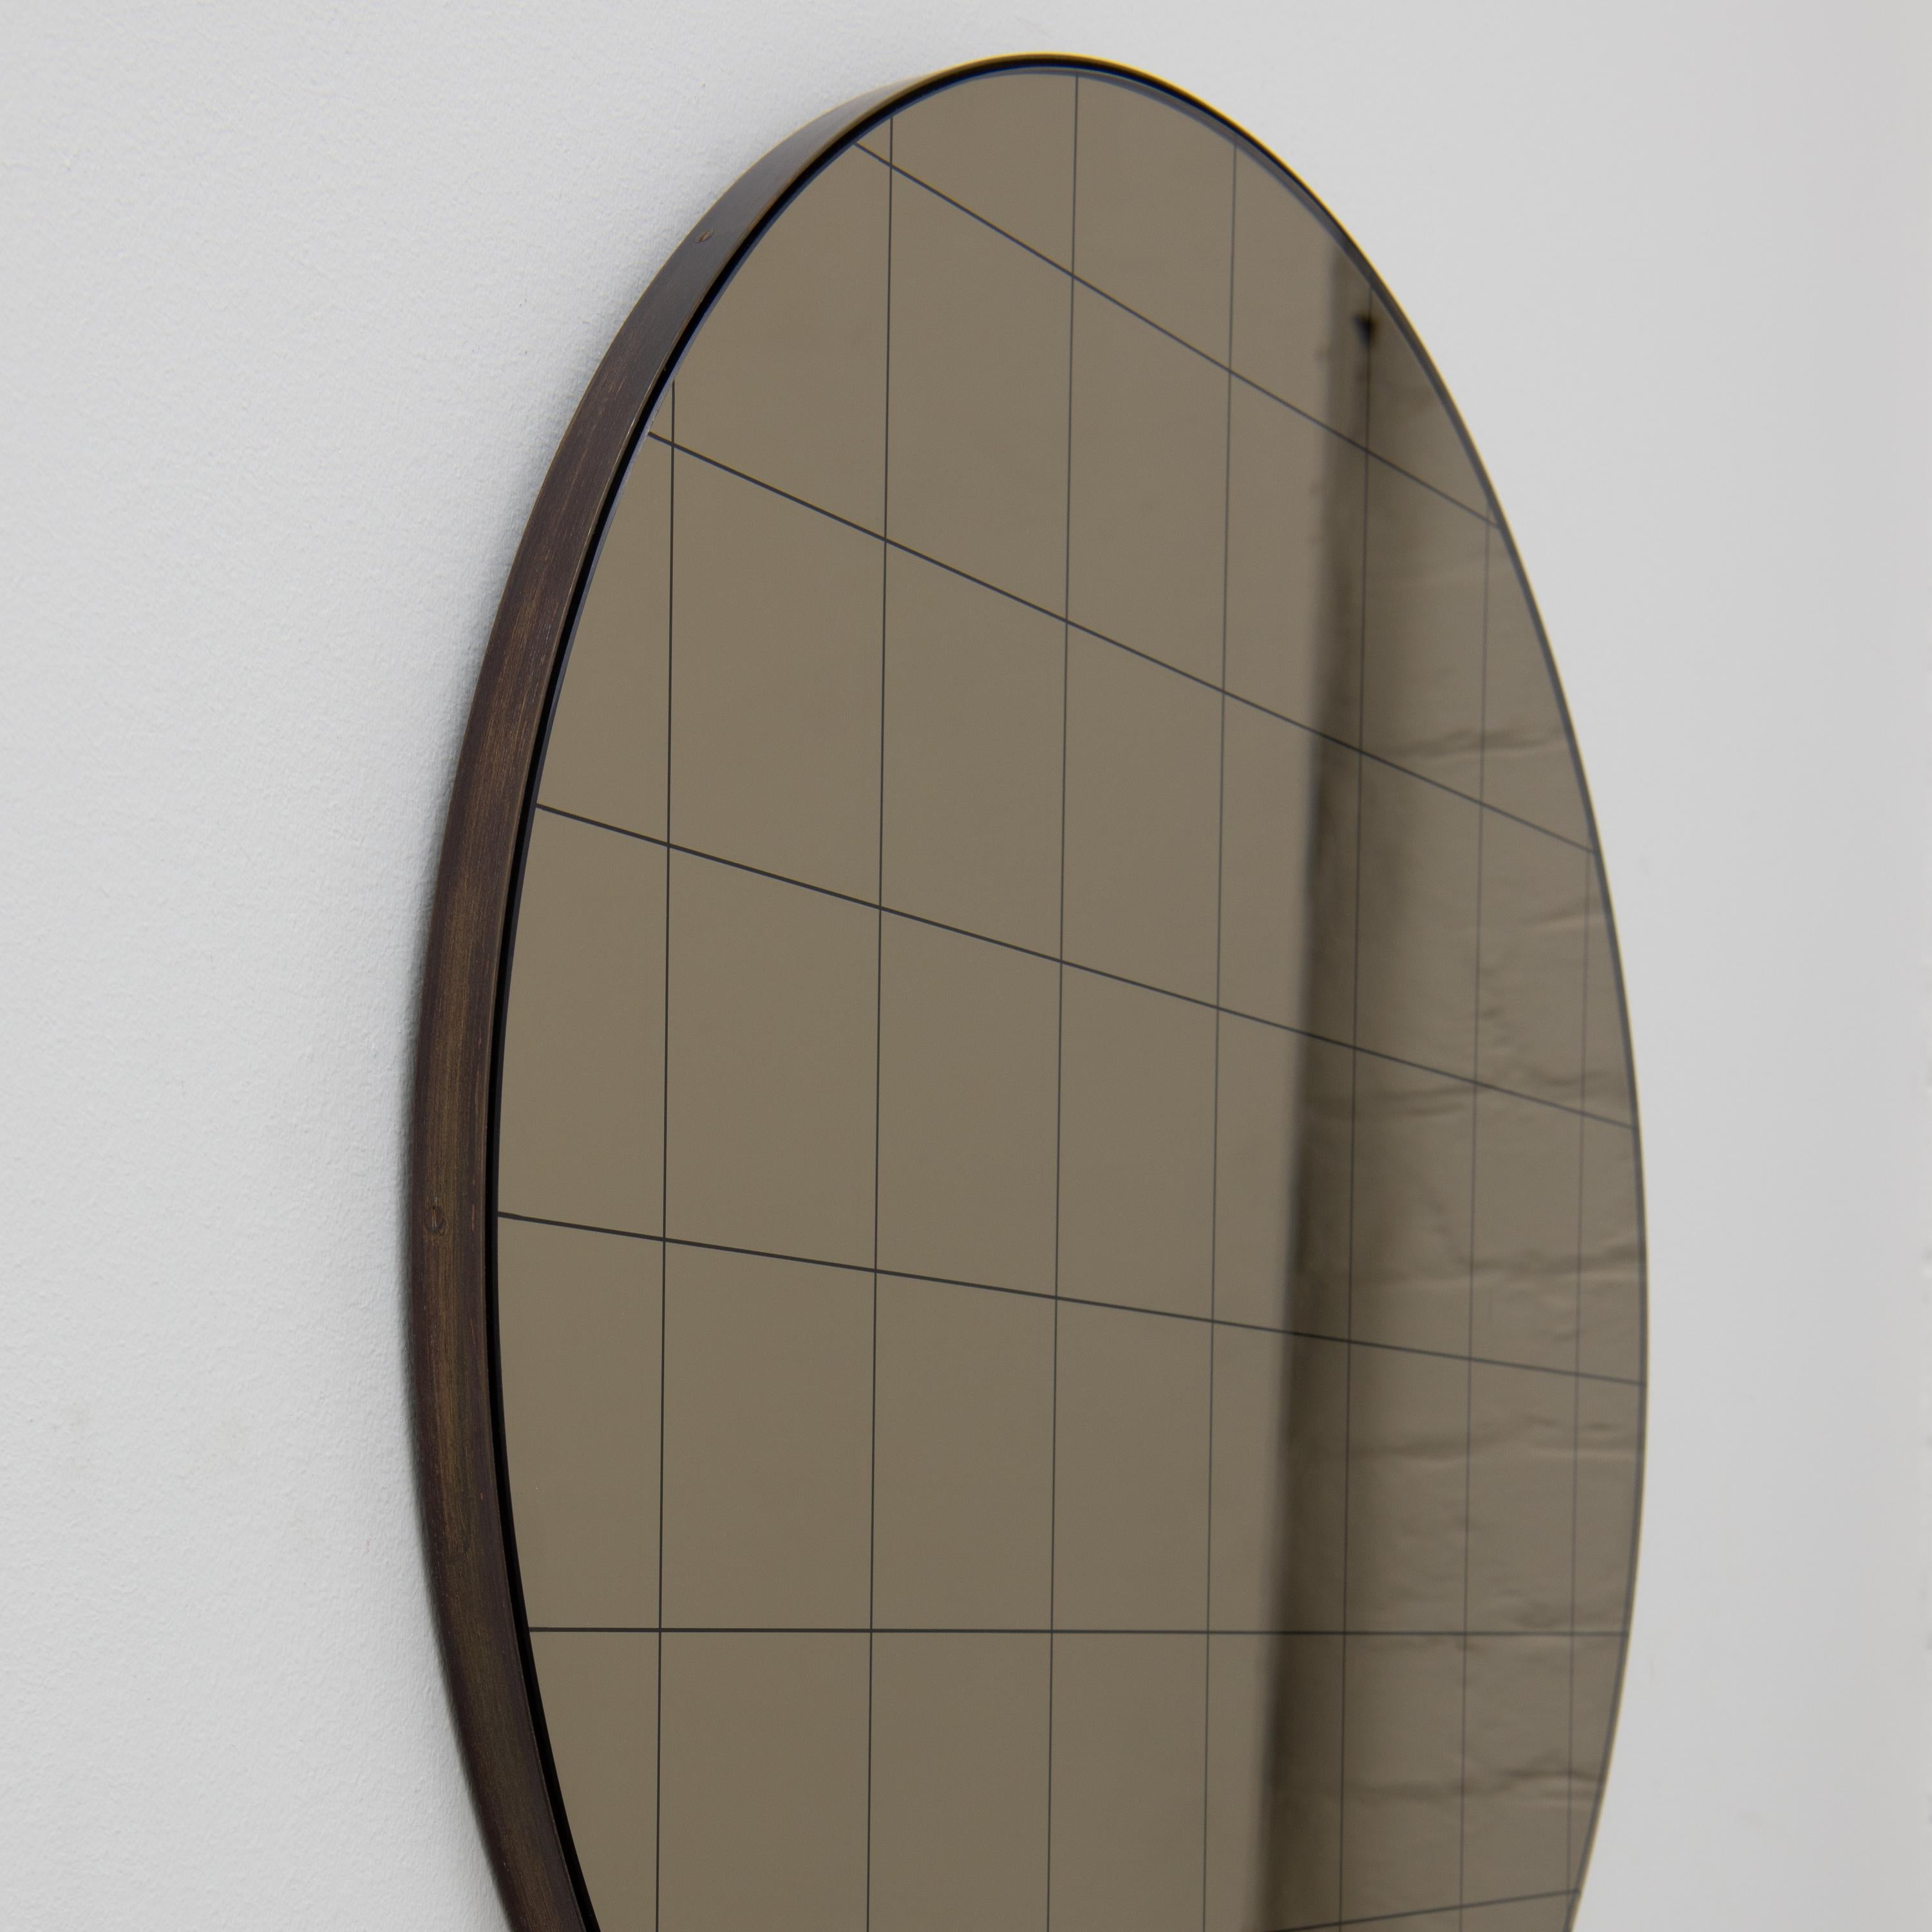 Modern round bronze mirror with an etched black grid and an elegant bronze patina brass frame. Designed and handcrafted in London, UK.

Fitted with a brass hook or an aluminium z-bar depending on the size of the mirror. Also available on demand with